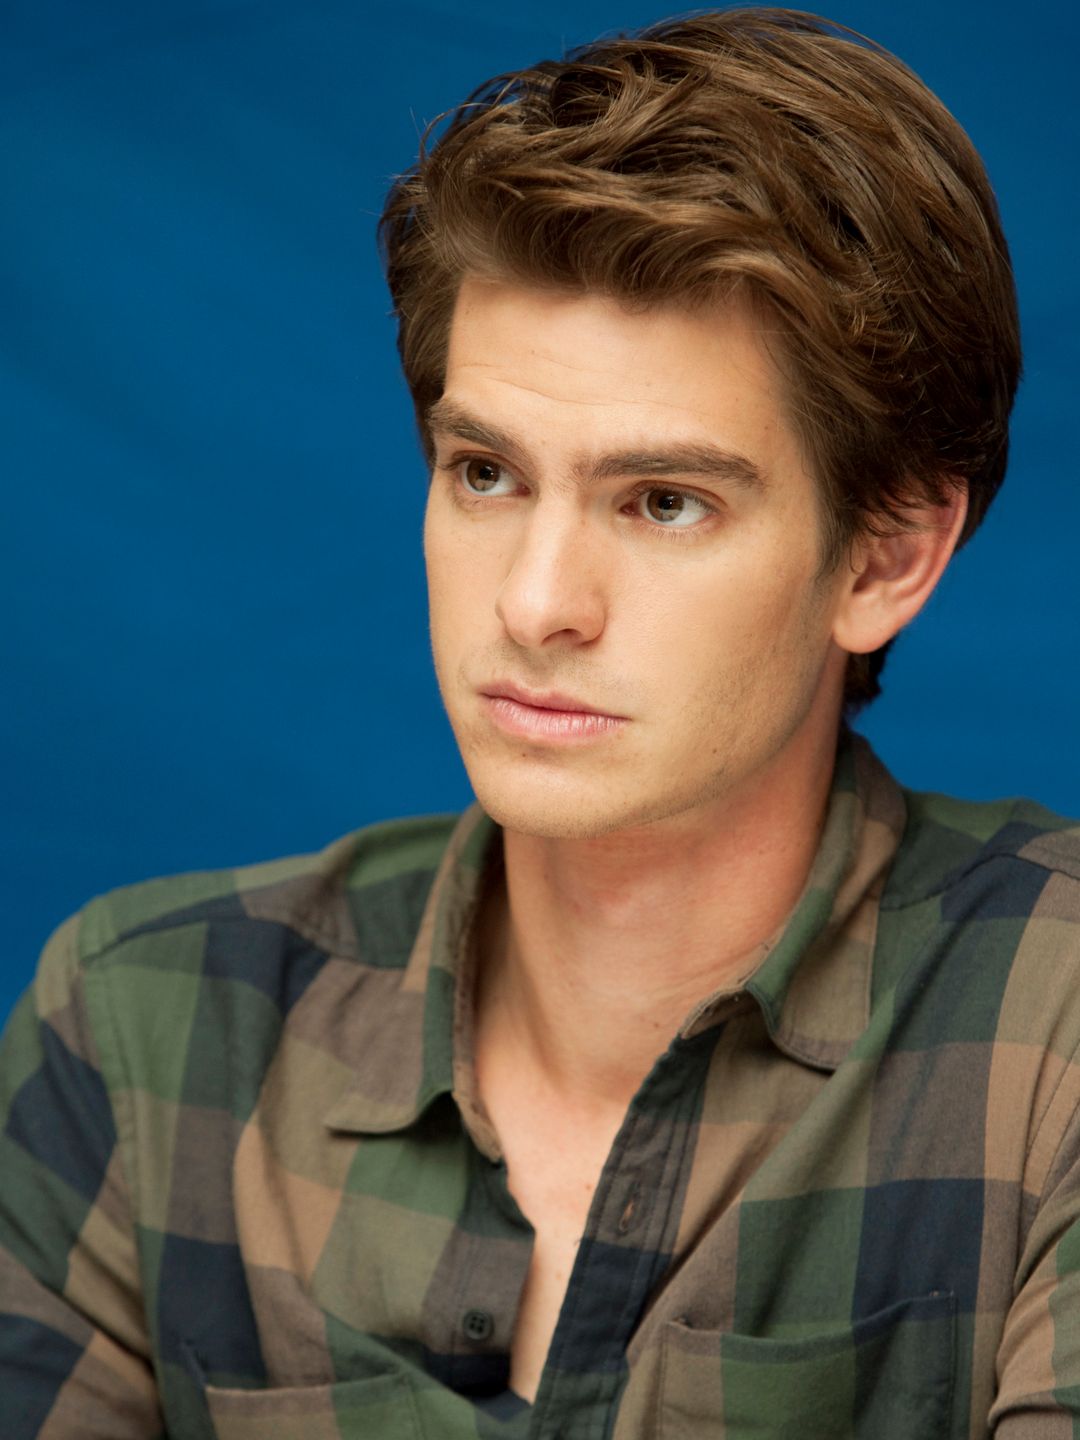 Andrew Garfield young photos